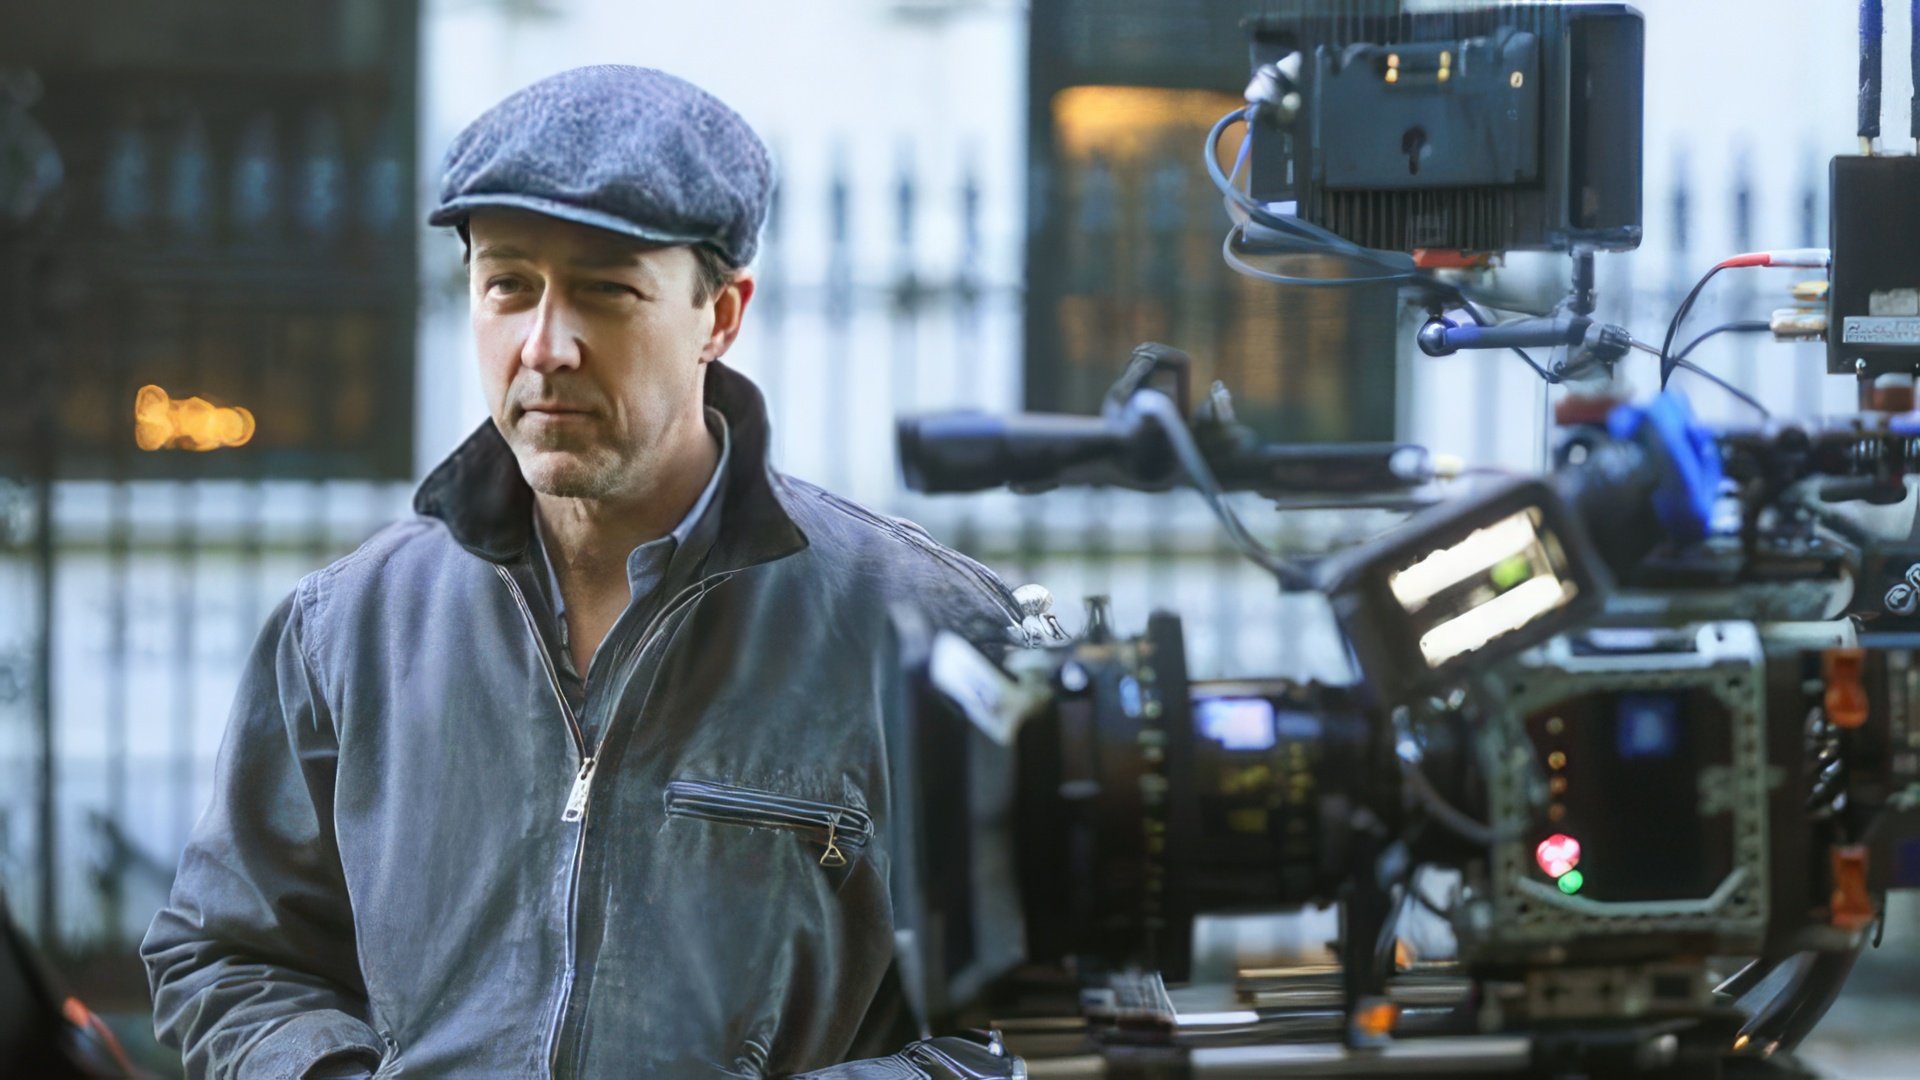 Since February 2018, Edward Norton has been working on the movie Motherless Brooklyn